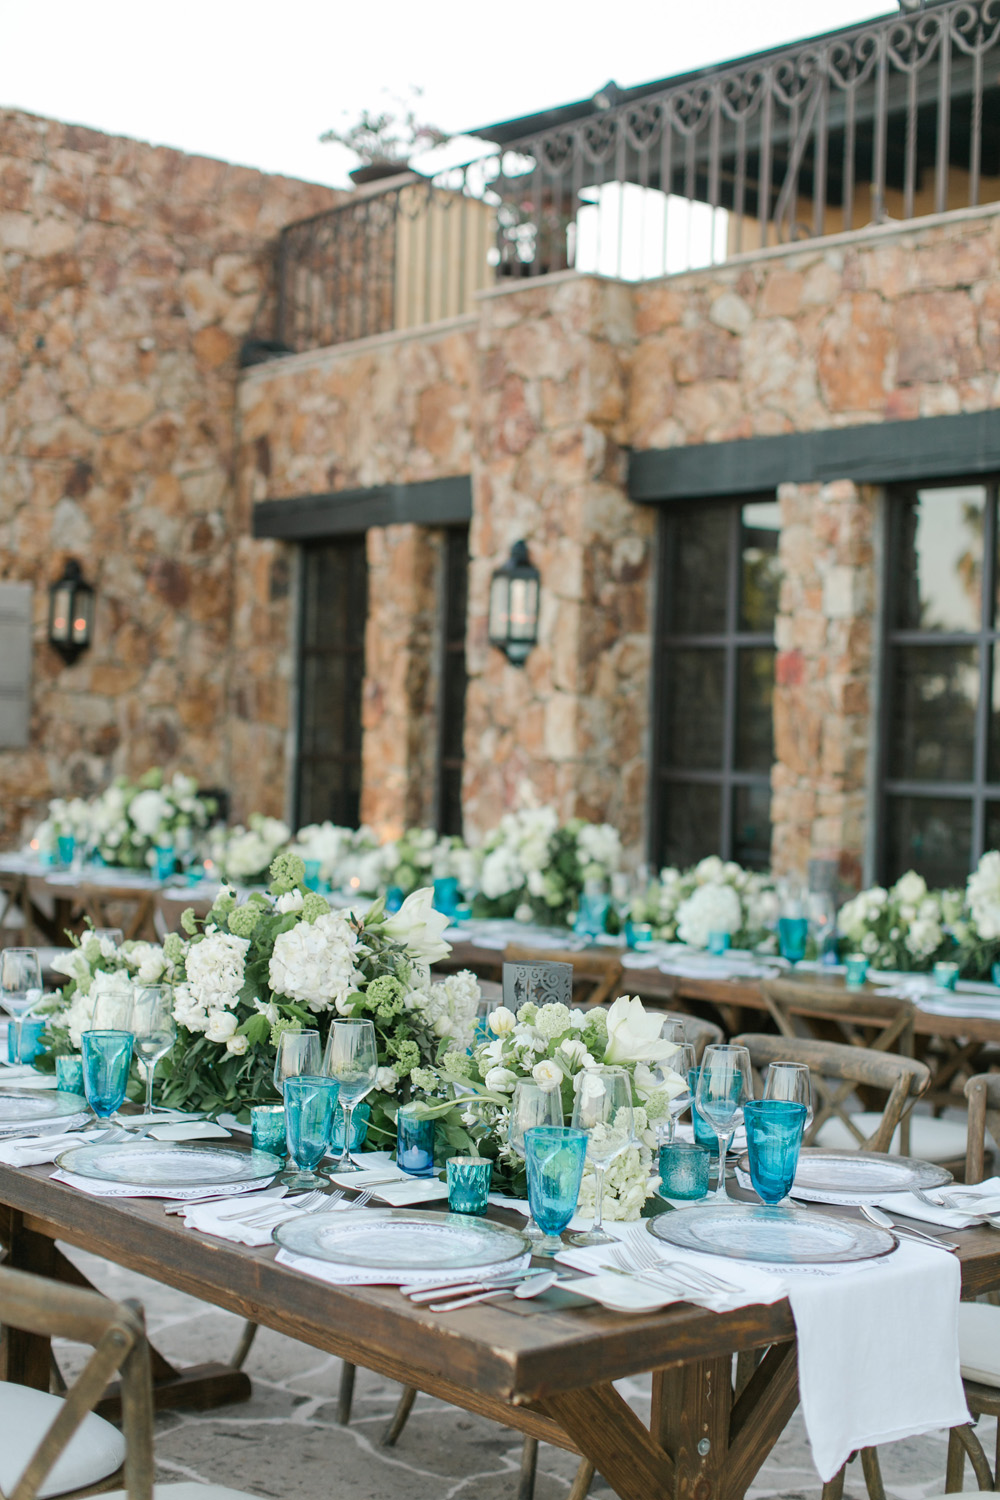 Elegant wedding reception setup featuring rustic wooden tables adorned with white floral centerpieces and blue transparent glasses, set against the backdrop of a stone building with dark framed windows.